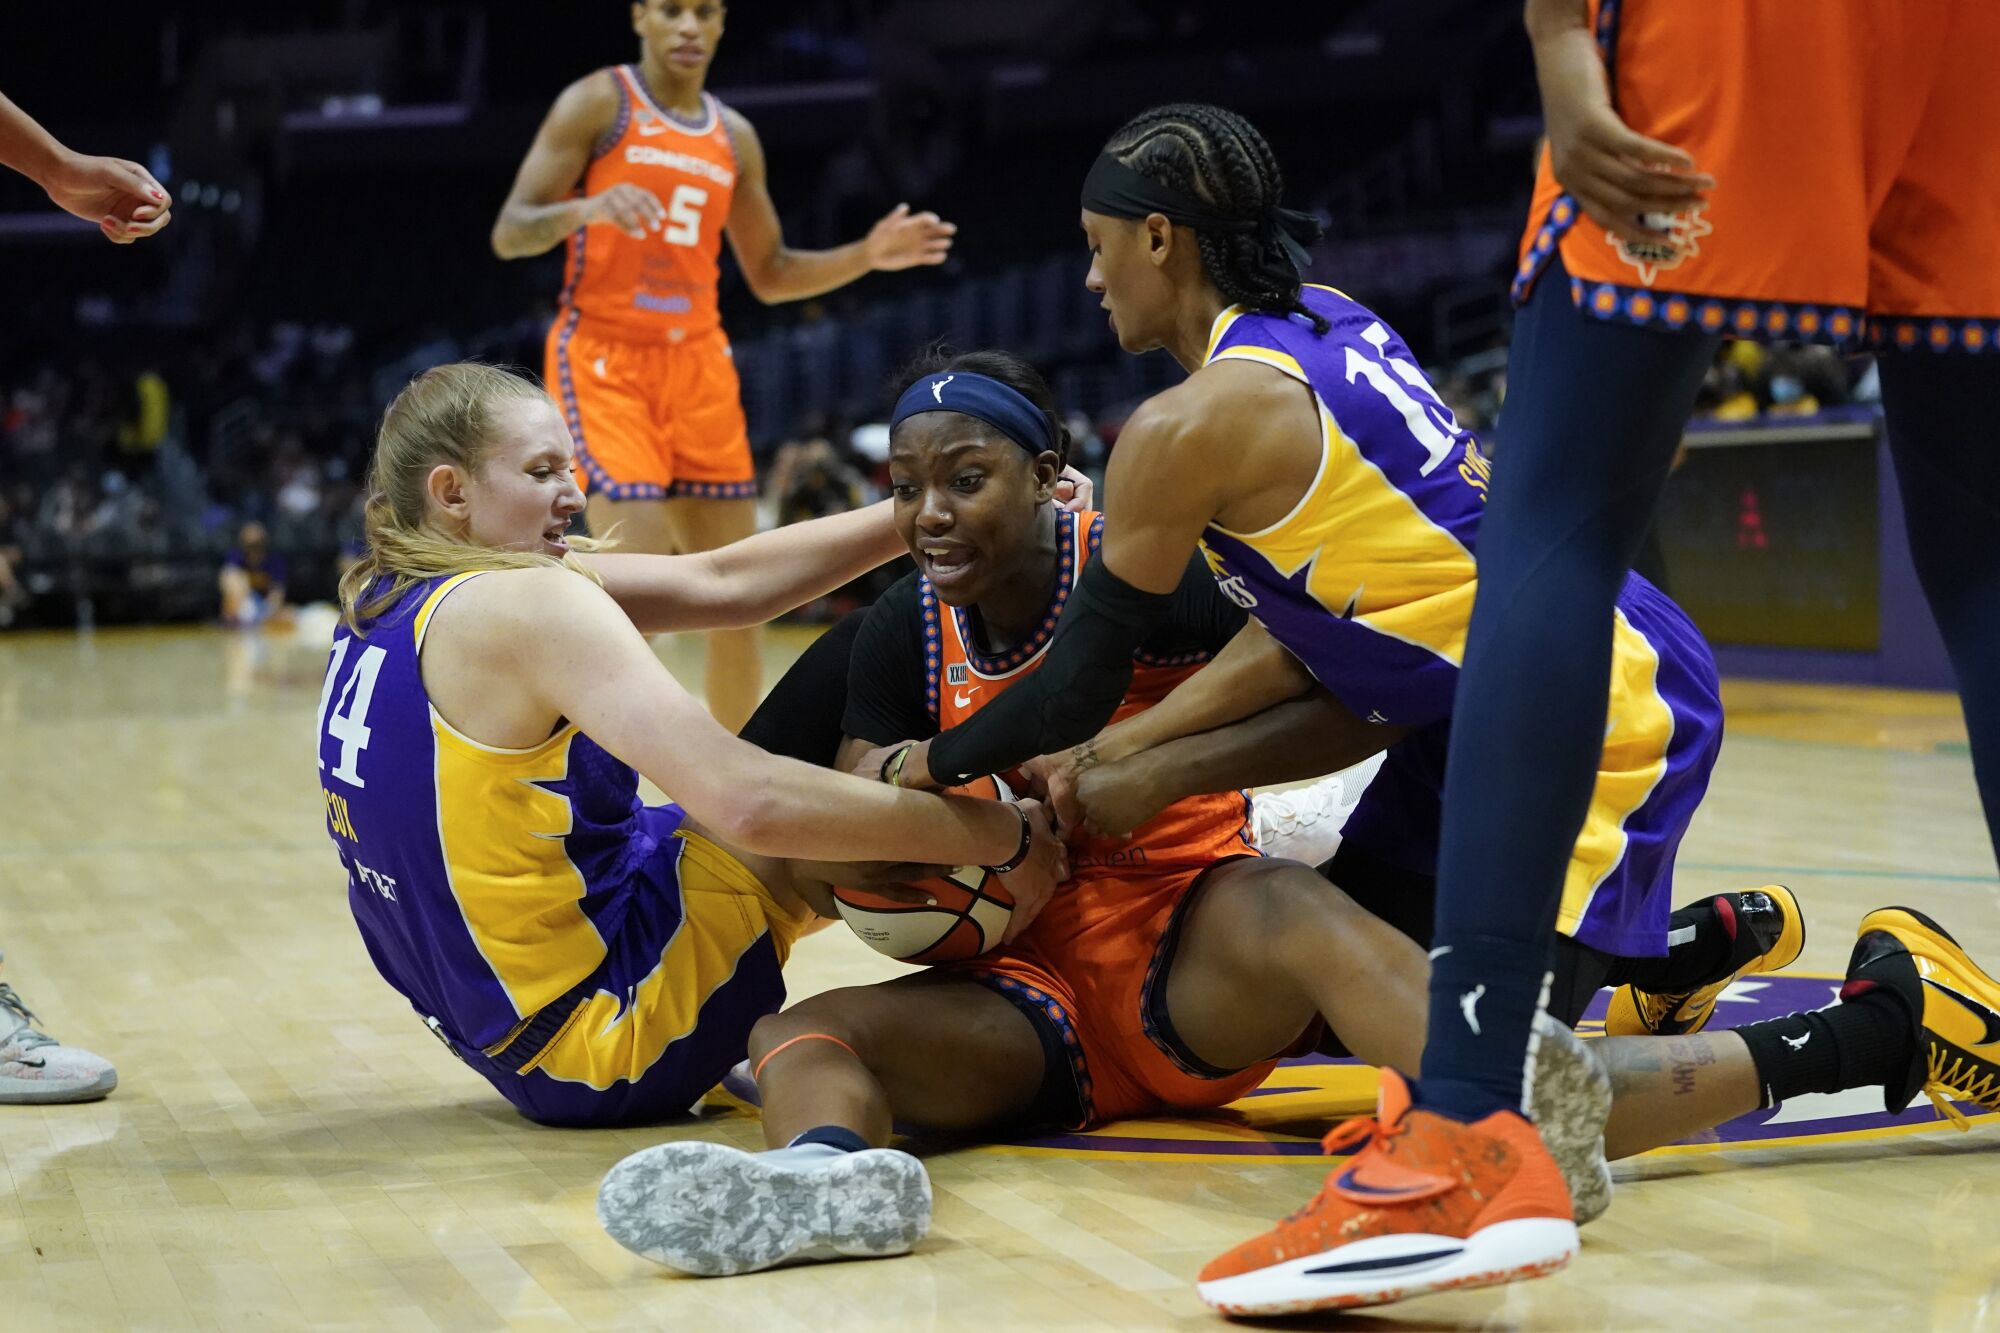 Sparks guard Brittney Sykes, right, and forward Lauren Cox battle for a loose ball with Sun forward Kaila Charles.